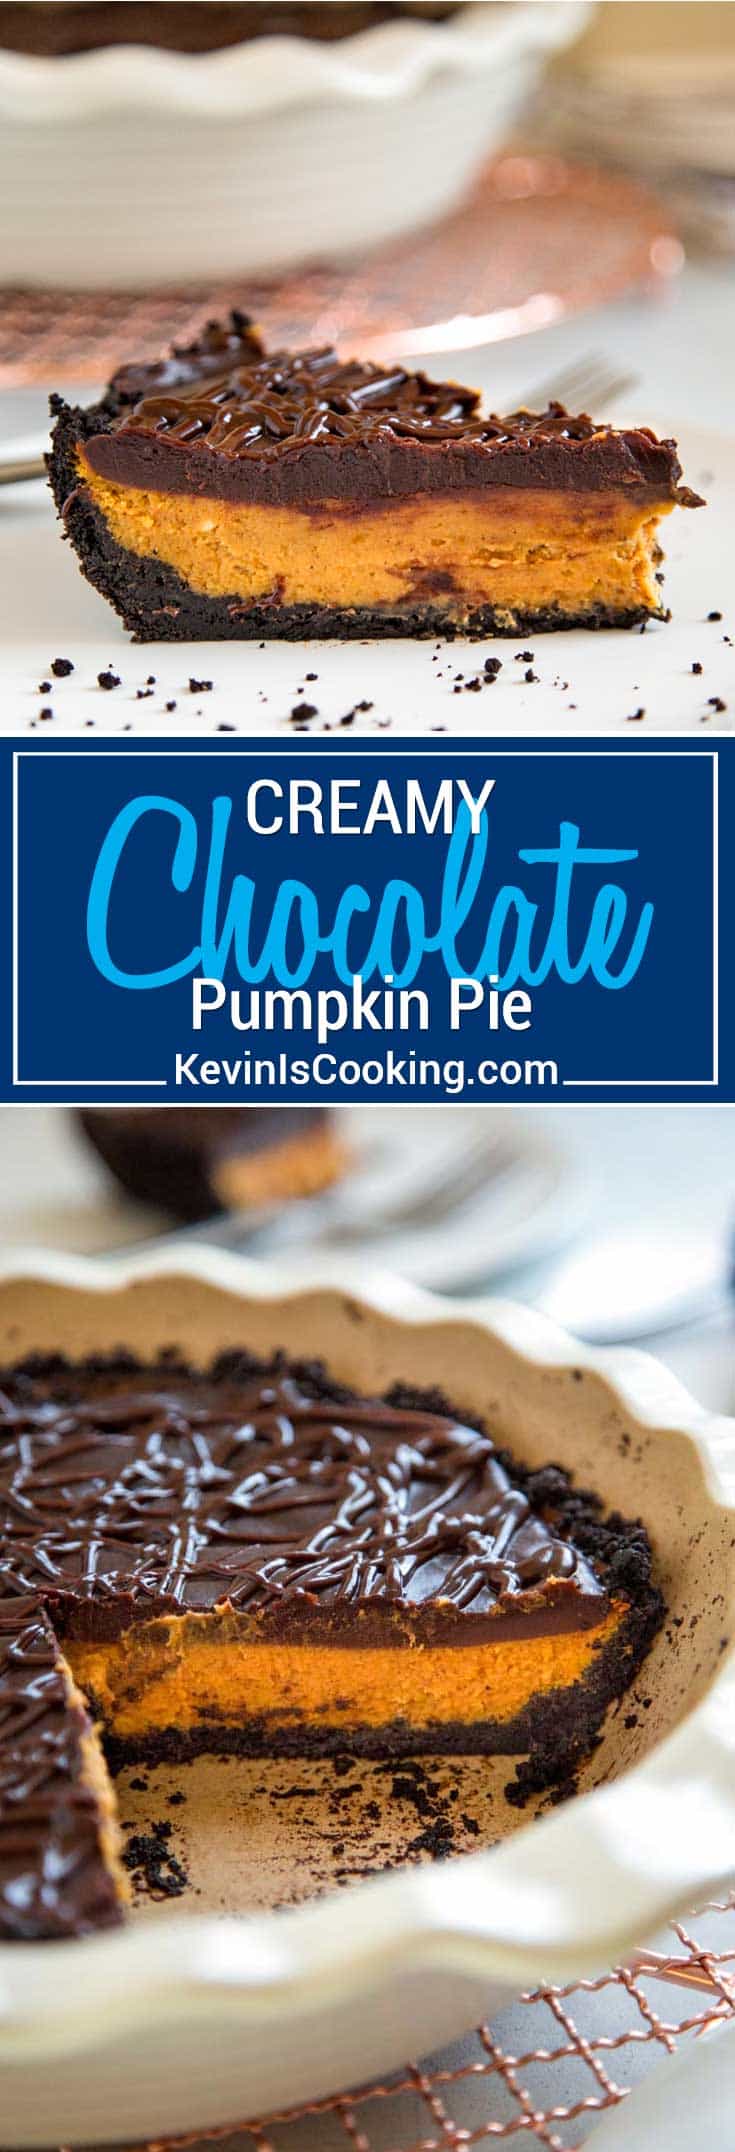 For this Chocolate Glazed Pumpkin Pie I layered a delicious glaze of chocolate ganache on top with a chocolate cookie crust for a spin on the classic pumpkin pie. So Good!